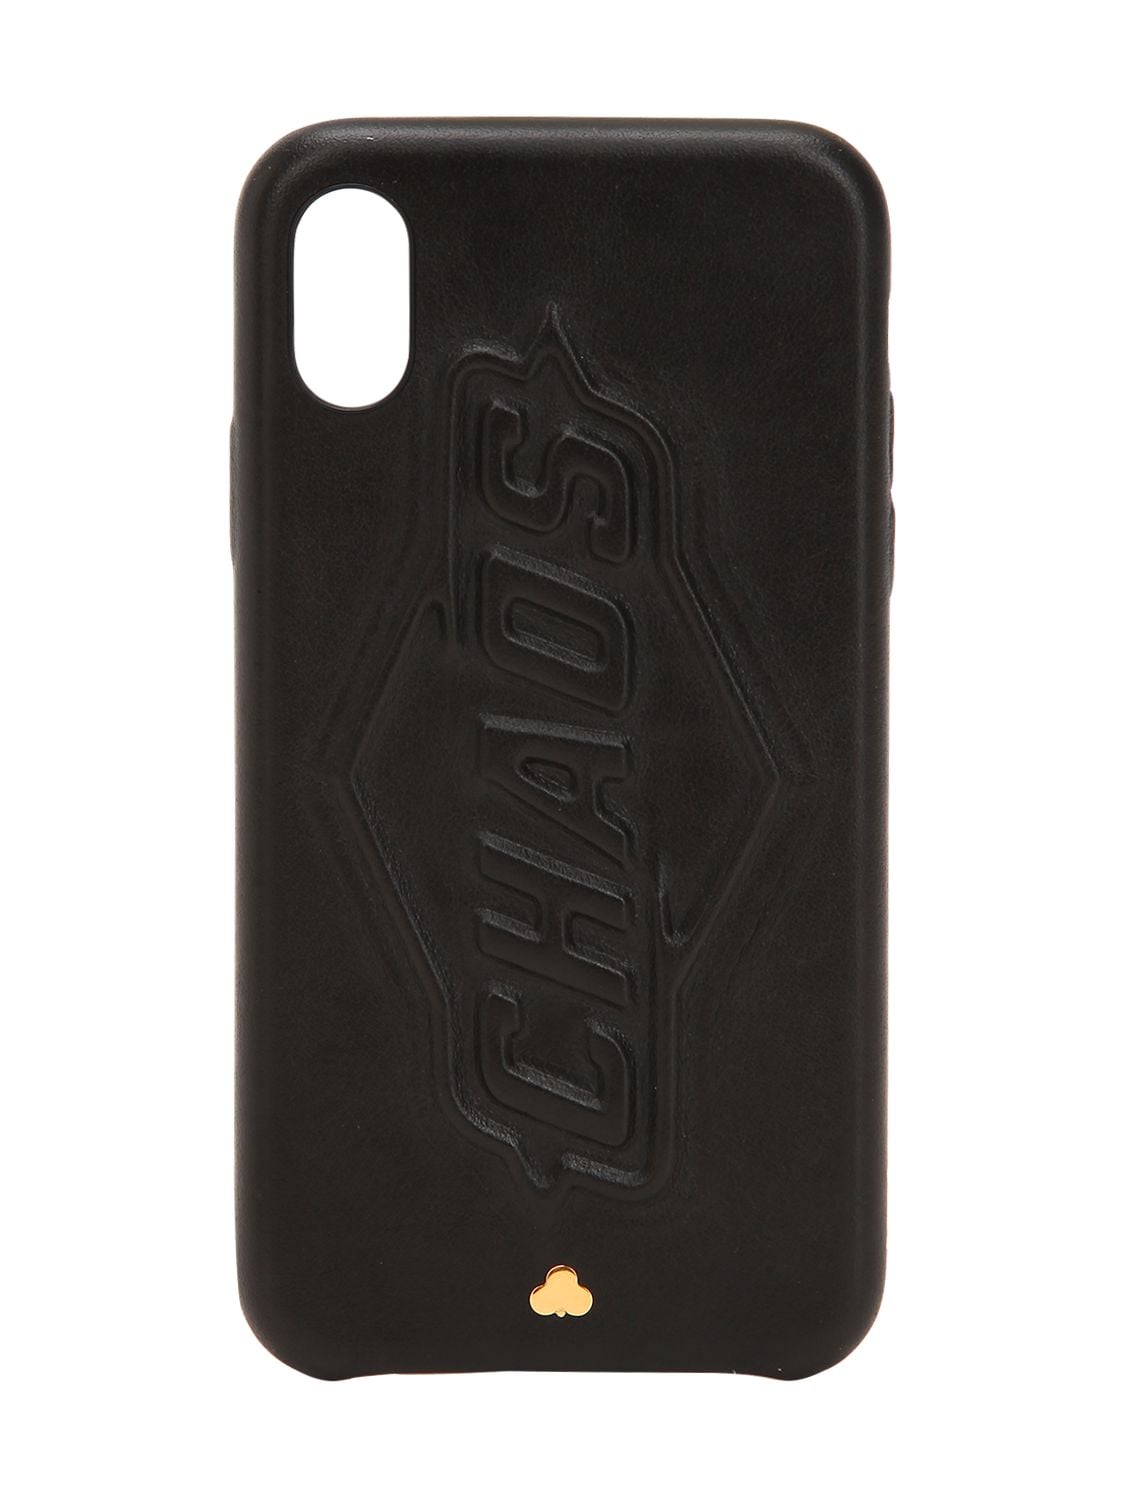 Chaos Blackout Leather Iphone 7/8 Plus Cover